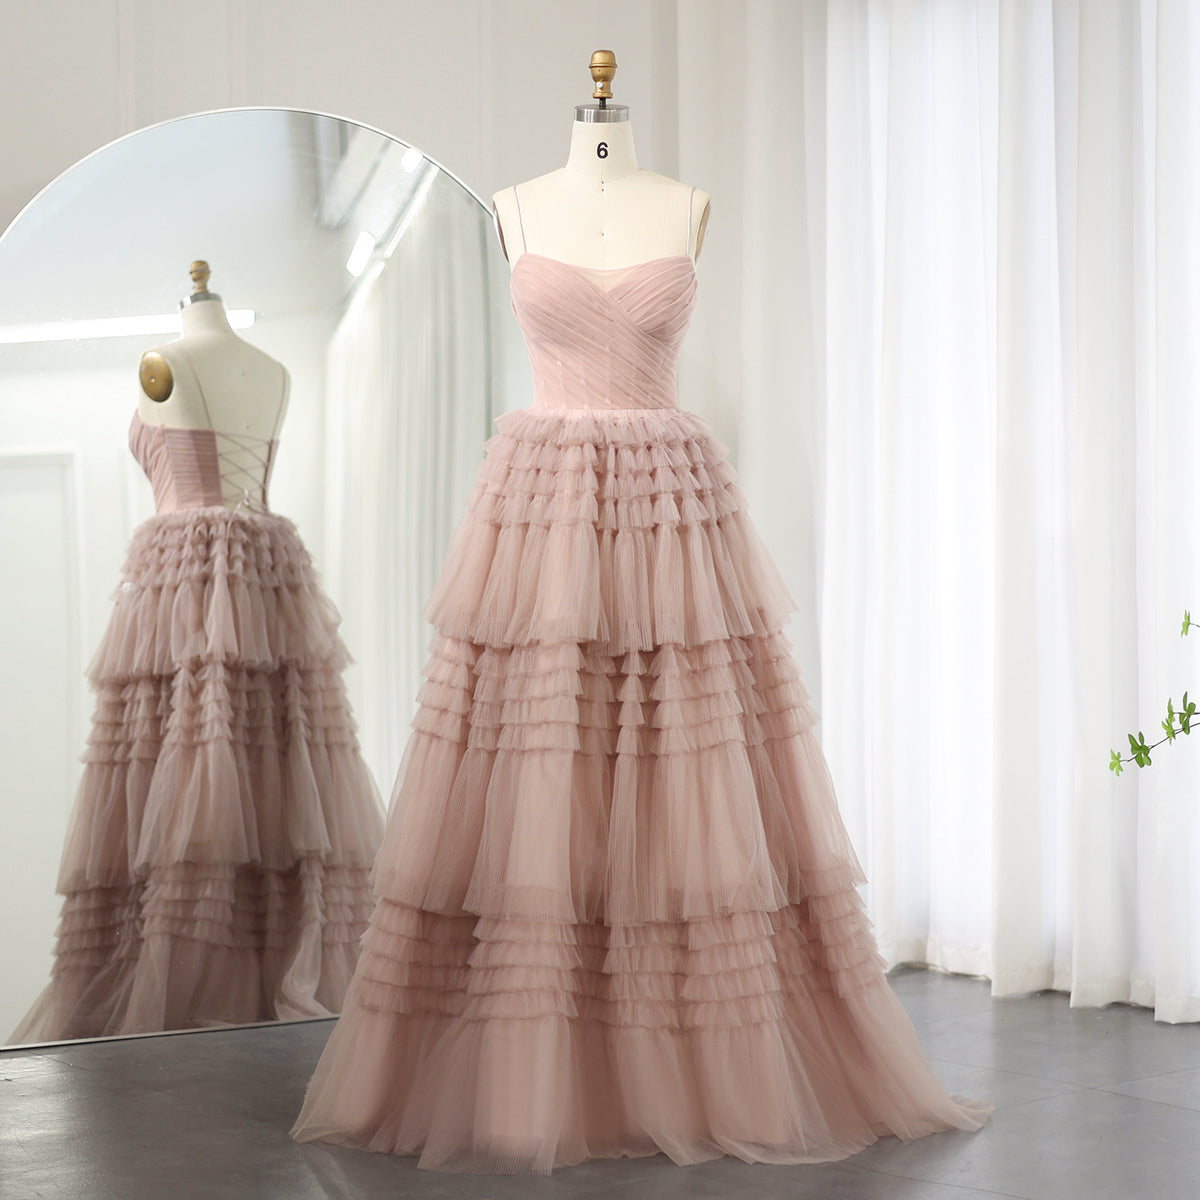 Sharon Said Elegant Pink Tiered Puffy Evening Dresses Sexy Spaghetti Straps Lace-up Long Women Wedding Party Gowns SS245